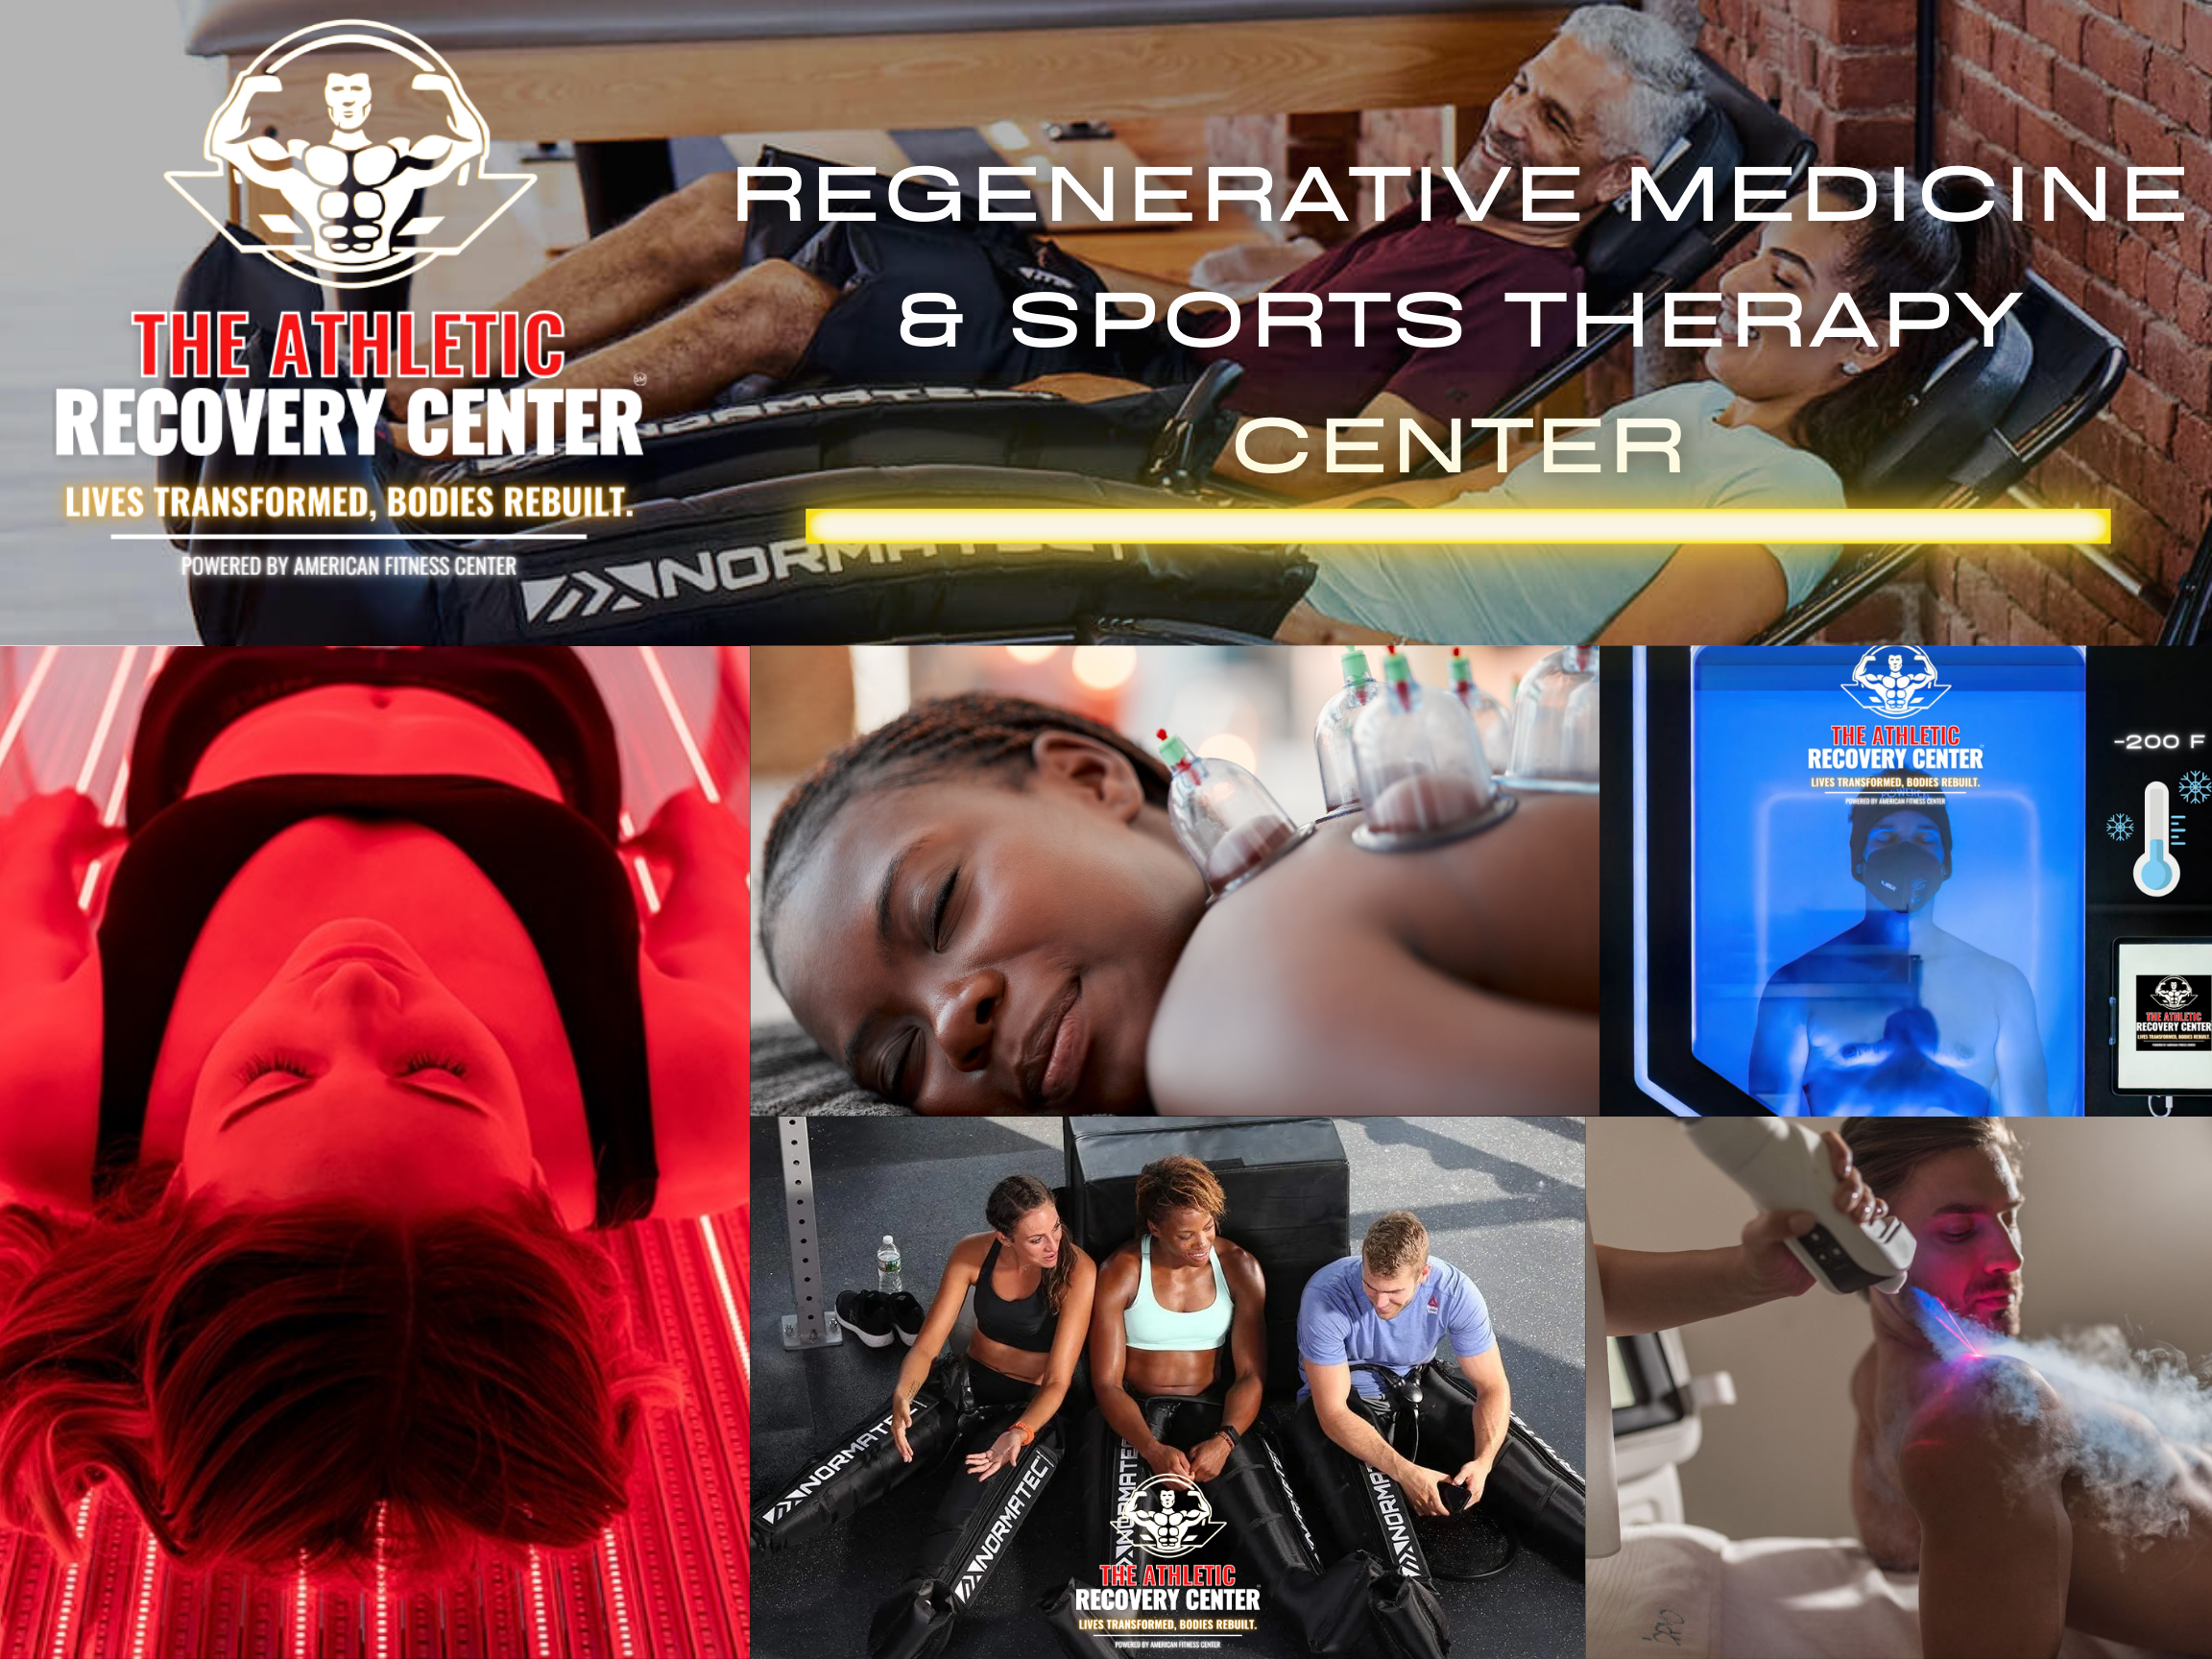 Regenerative-Health-Sports-Therapy-Center-In-Peachtree-City-GA-The-Athletic-Recovery-Center-in-Peachtree-City-GA-American-Fitness-Center-Peachtree-City